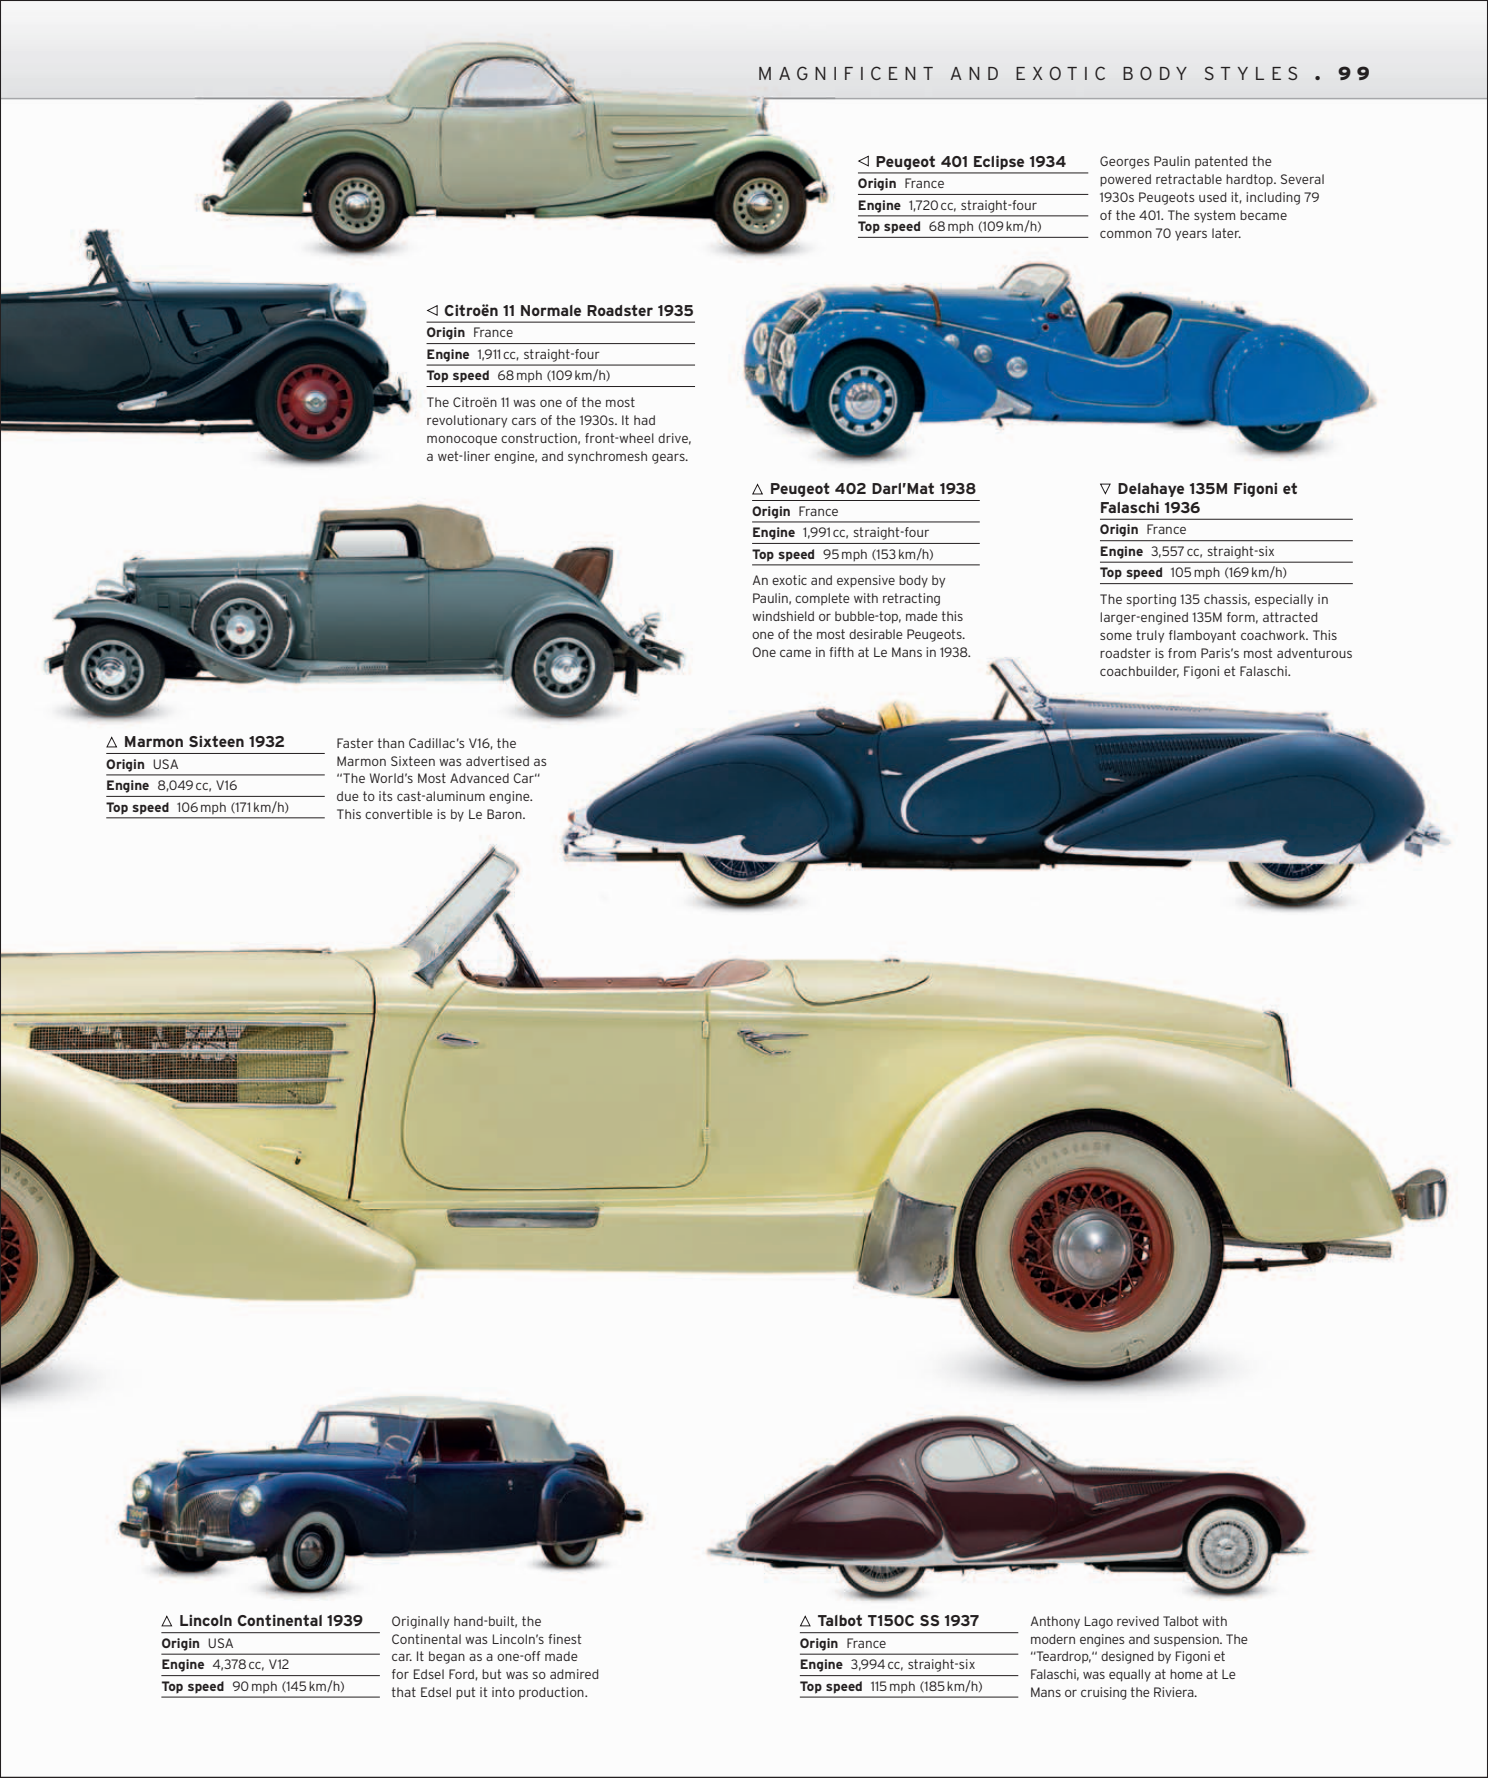 Car%20-%20The%20Definitive%20Visual%20History%20of%20the%20Automobile_101.png